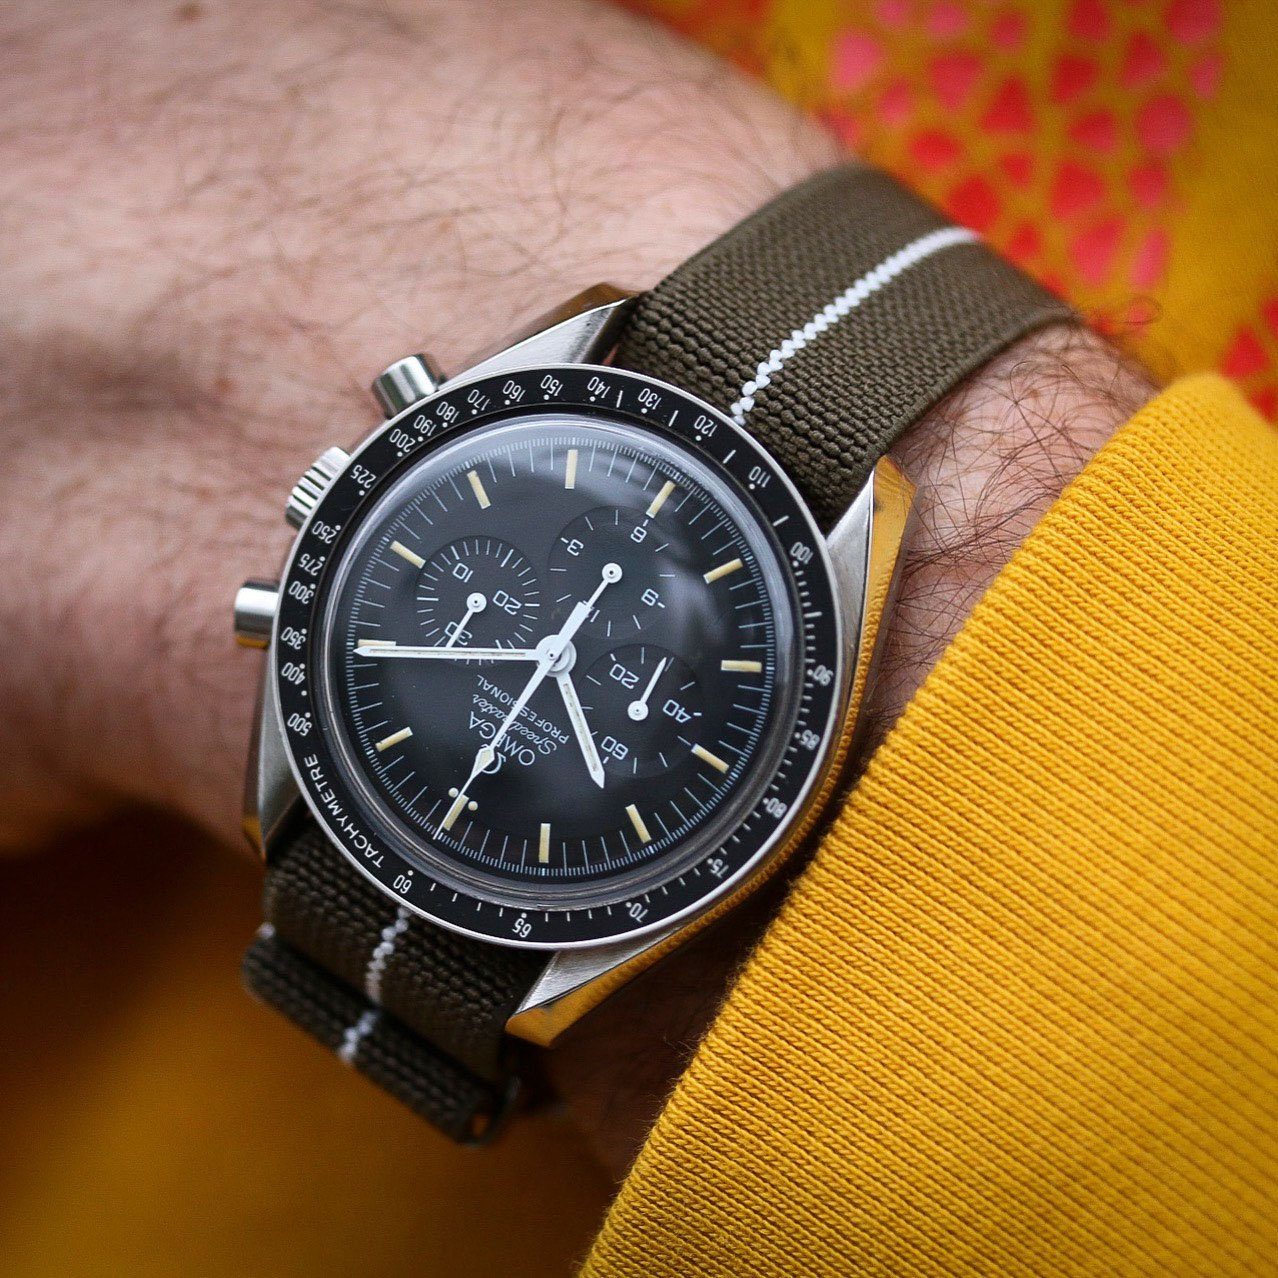 Check out this beautiful speedmaster on our comfortable Elastic